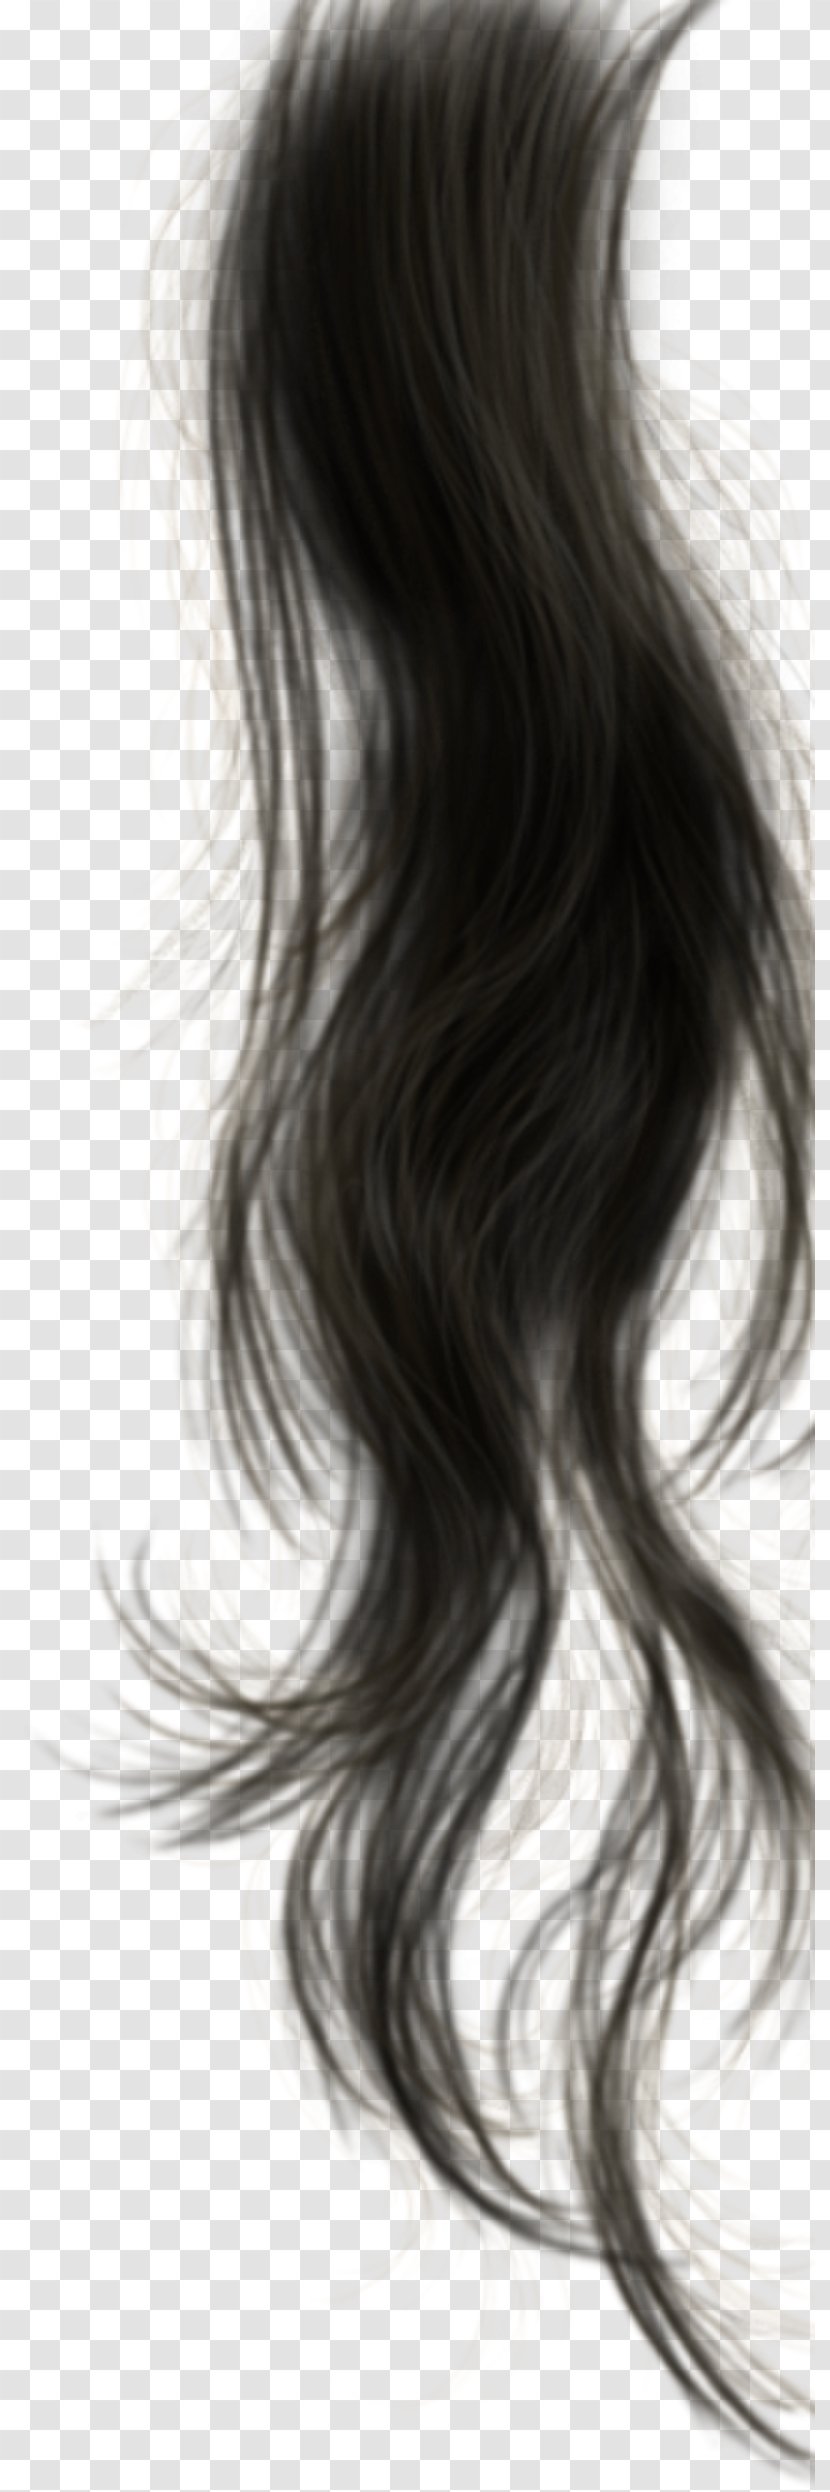 Hair Wig - Silhouette Transparent PNG